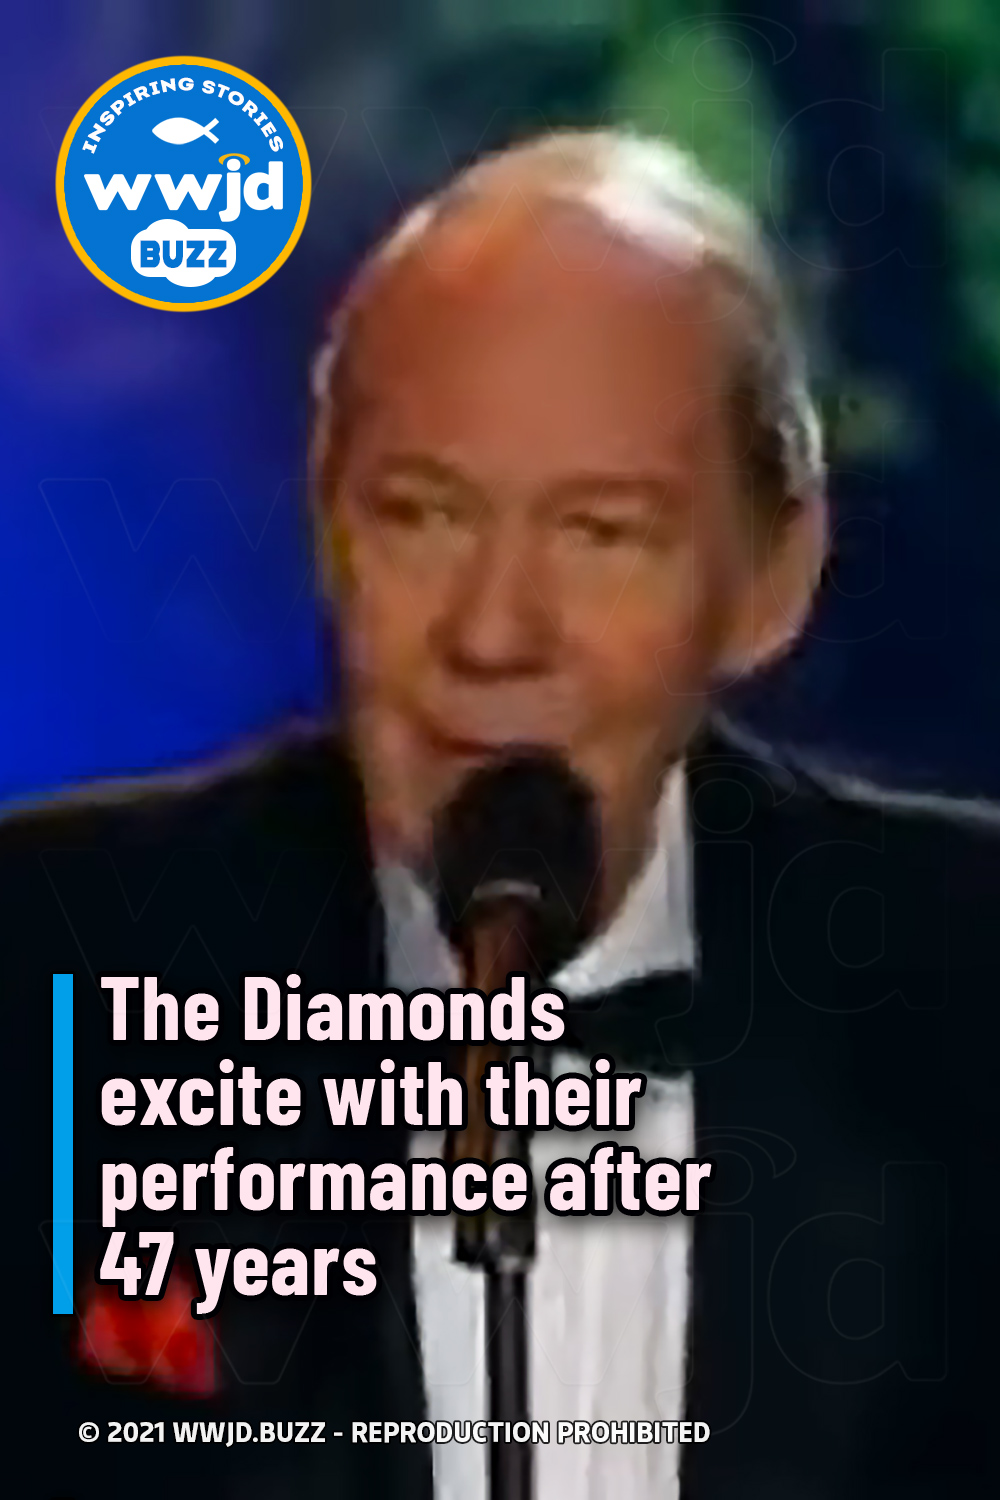 The Diamonds excite with their performance after 47 years